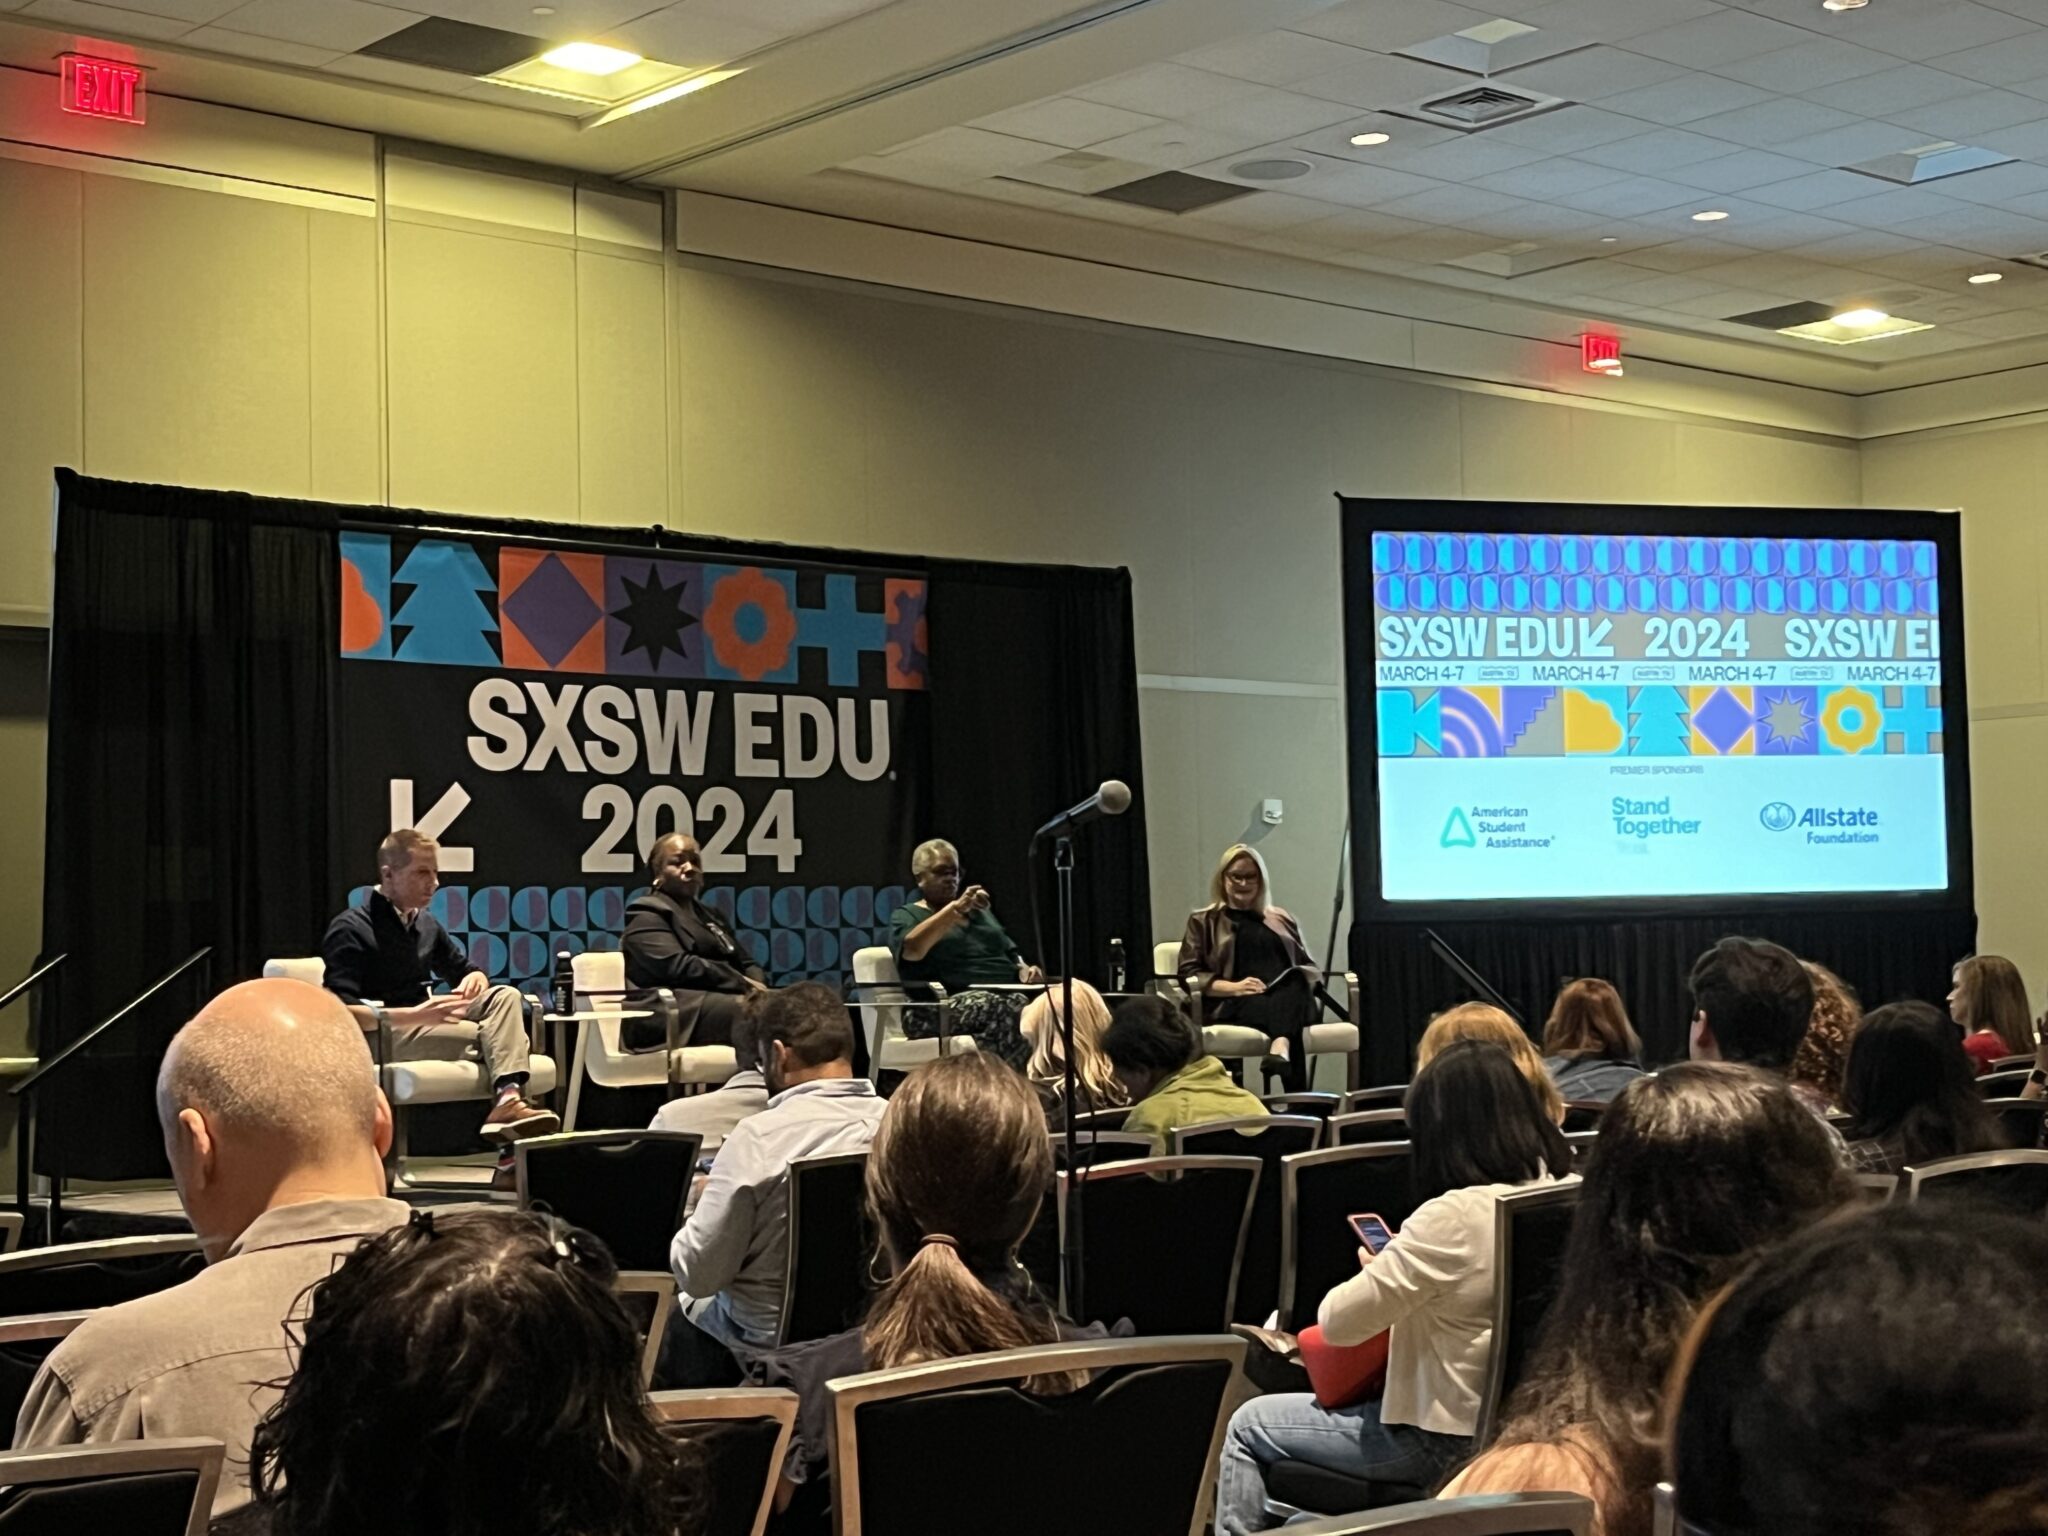 SXSW EDU: What’s Next for Higher Education?